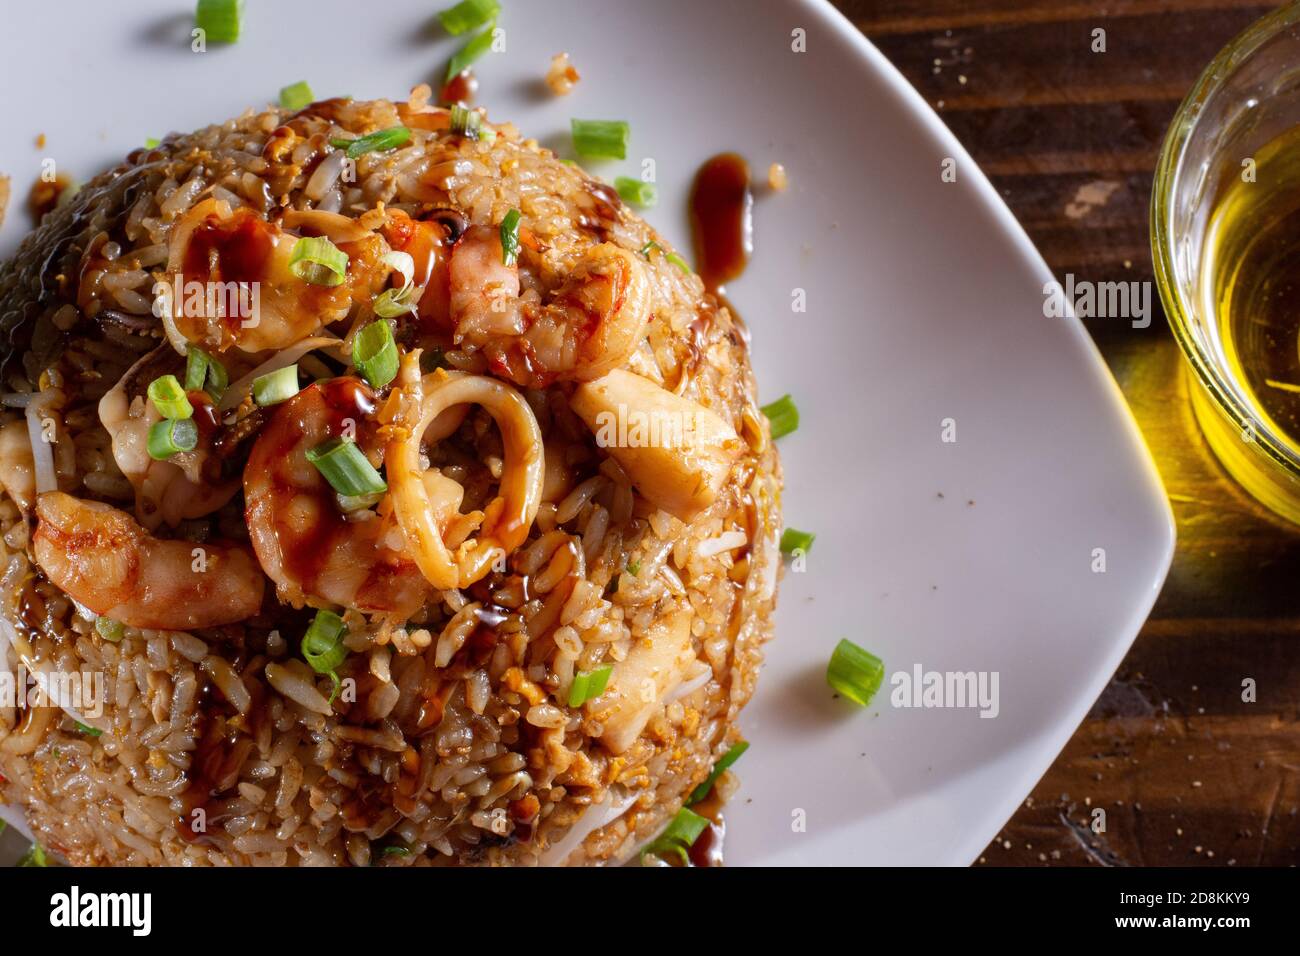 Arroz con mariscos rice whit seafood prawns typical peruvian food in wood table Stock Photo